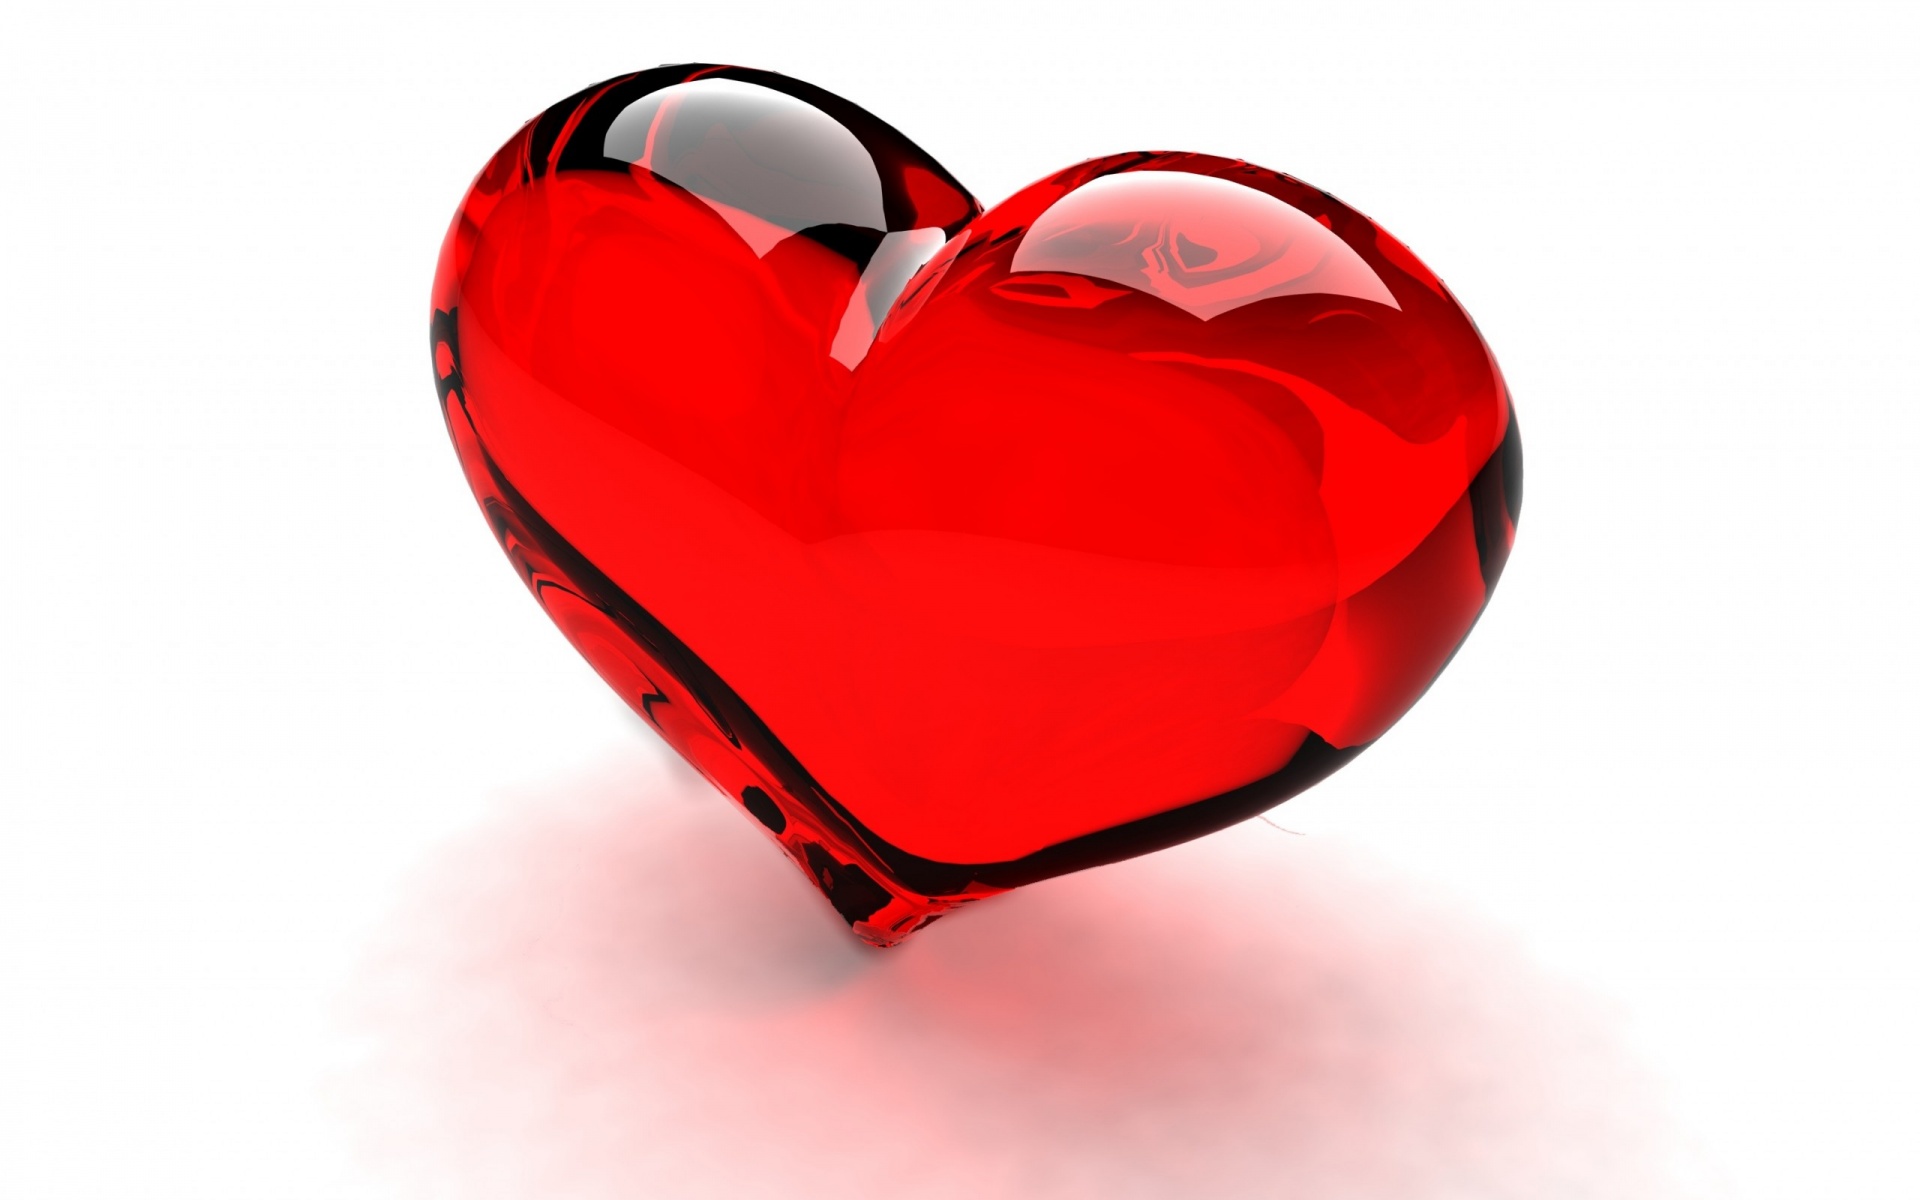 Red Glossy Heart